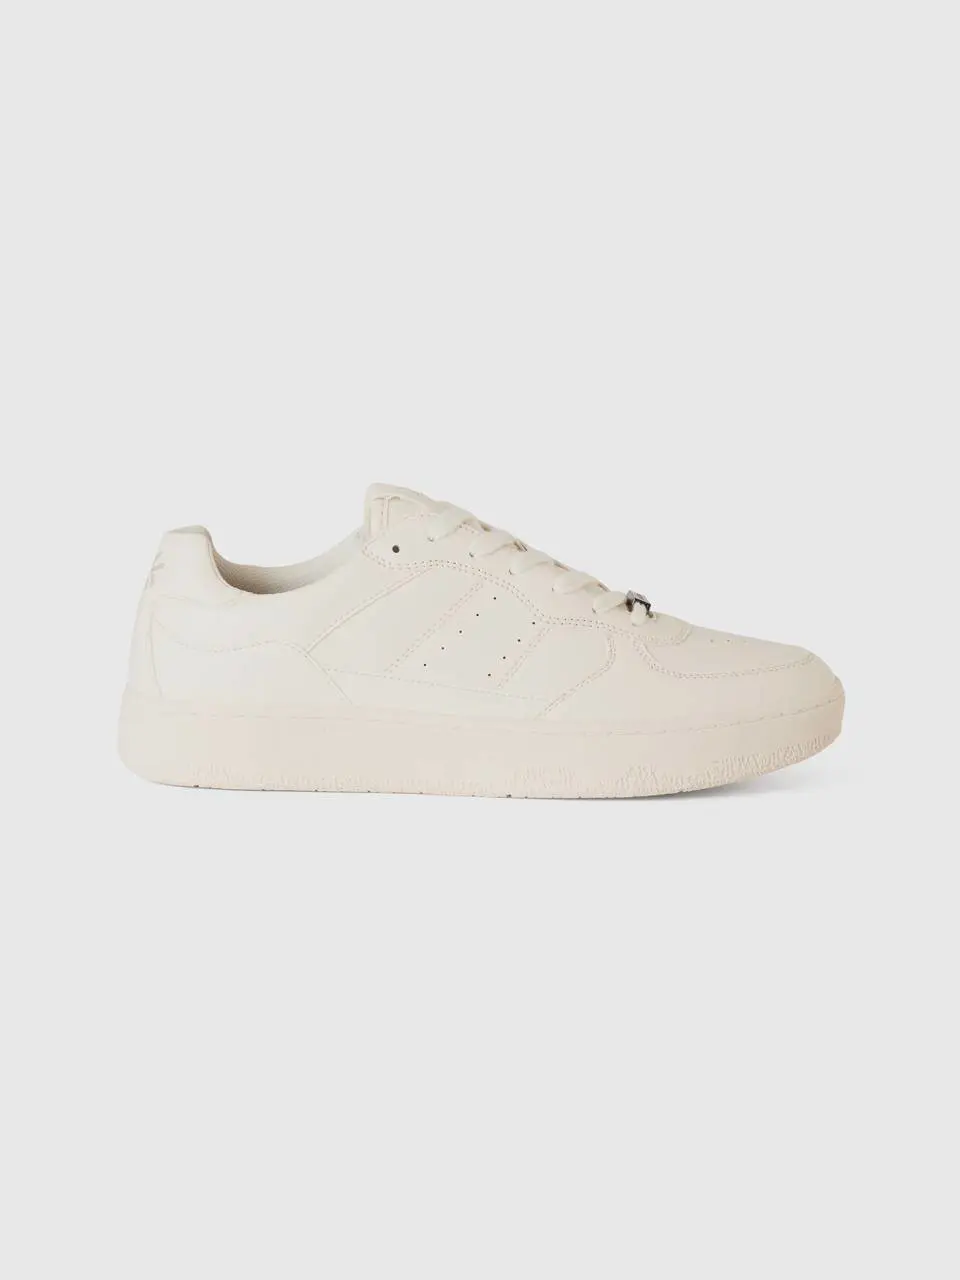 Benetton low-top sneakers in imitation leather. 1